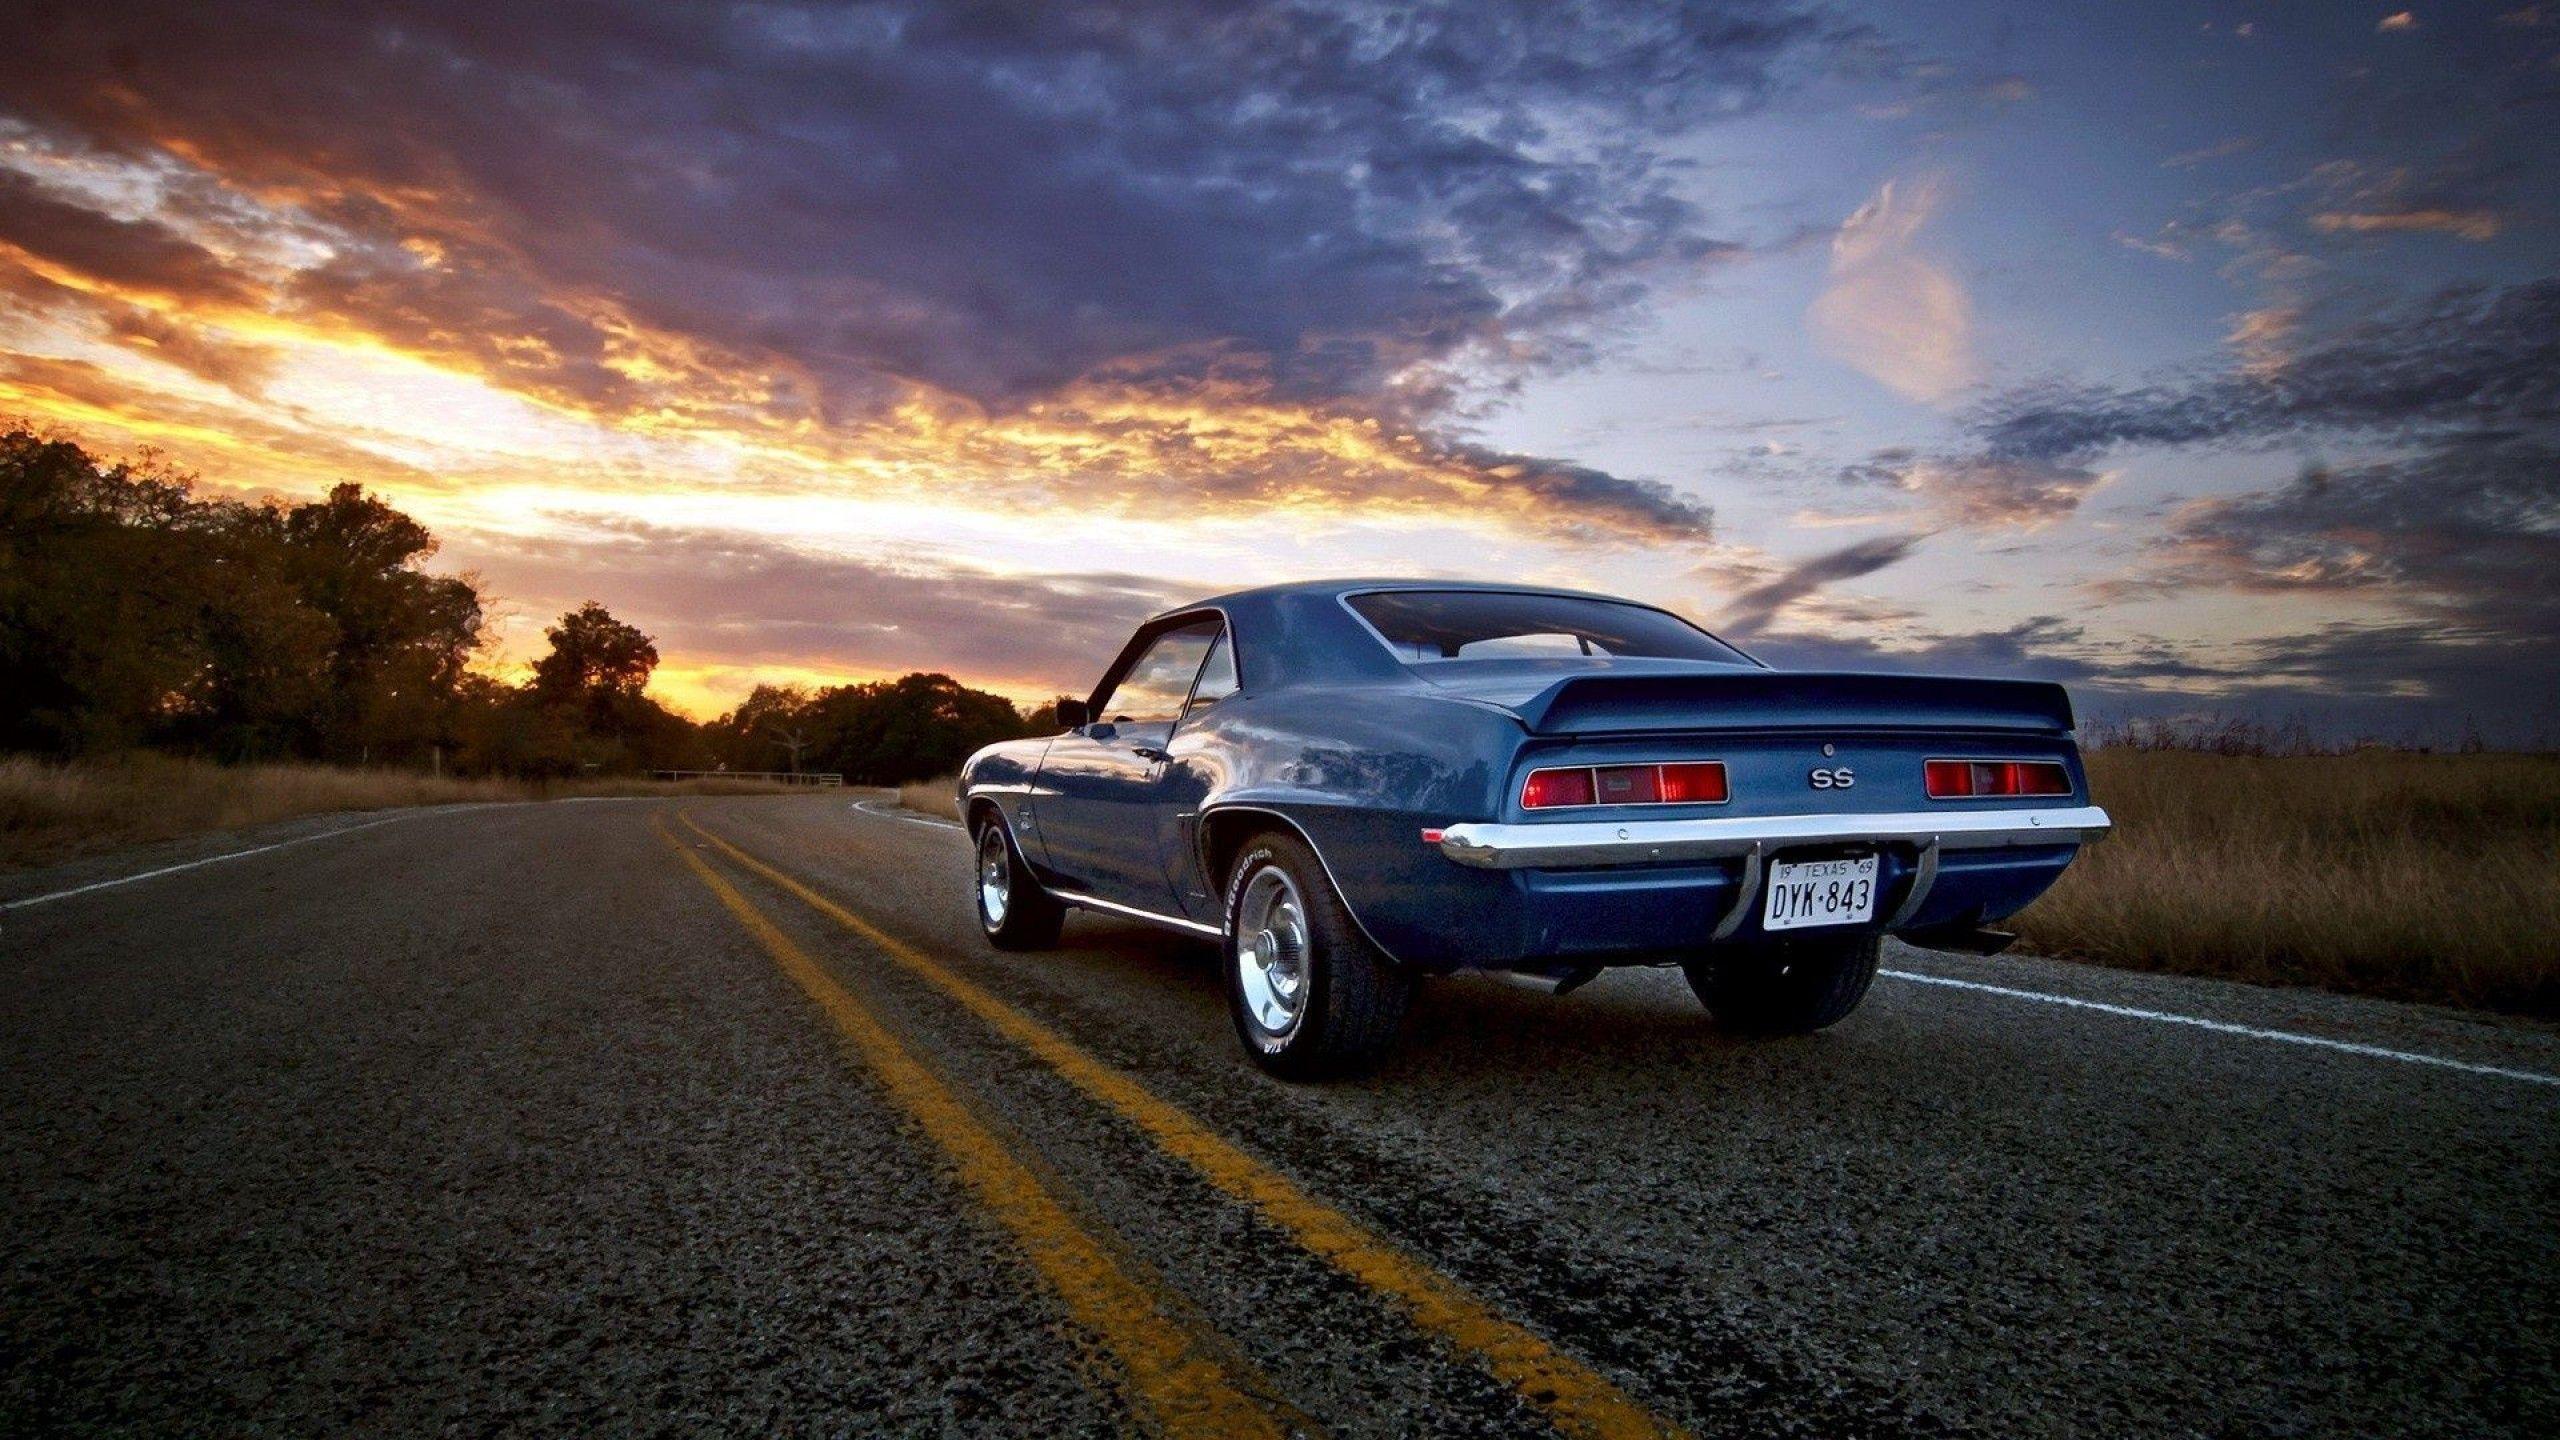 86 Aesthetic American freedom open road wallpaper car for Android Wallpaper